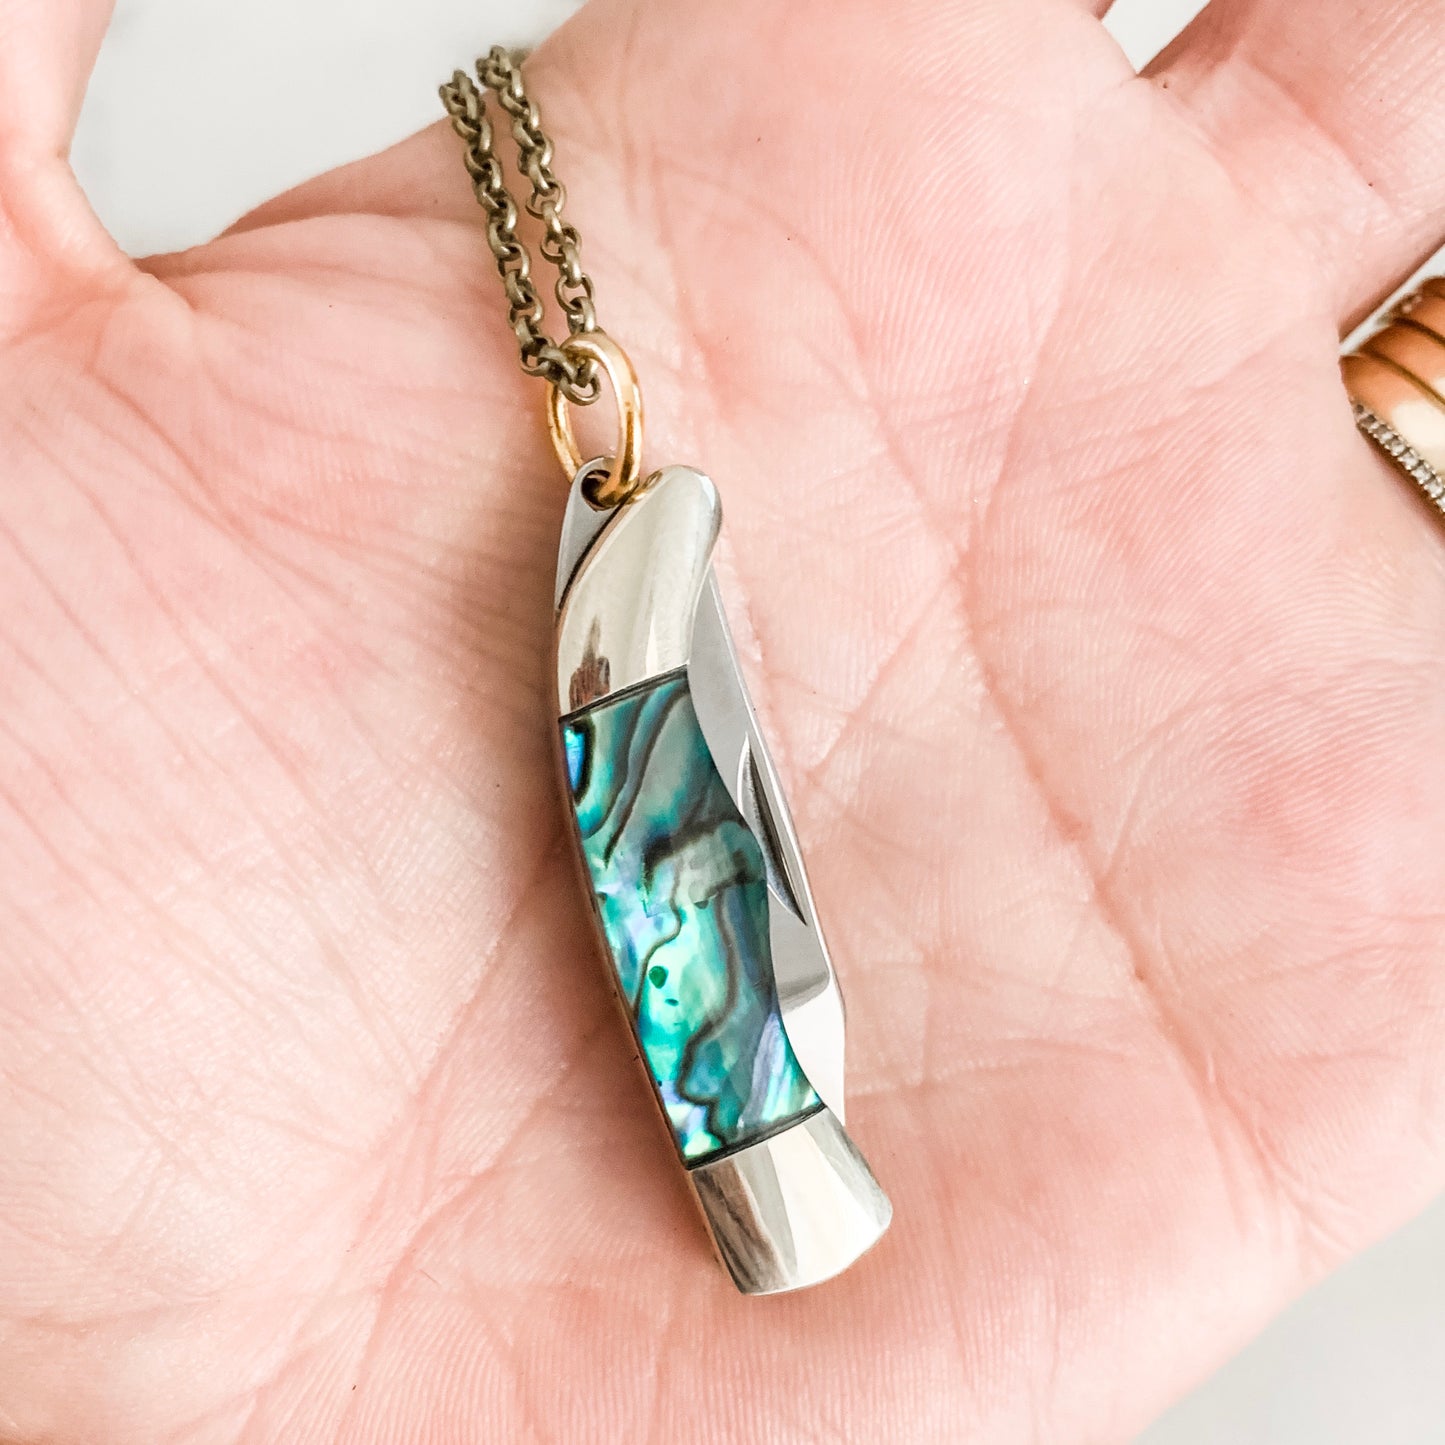 The Abalone Necklace